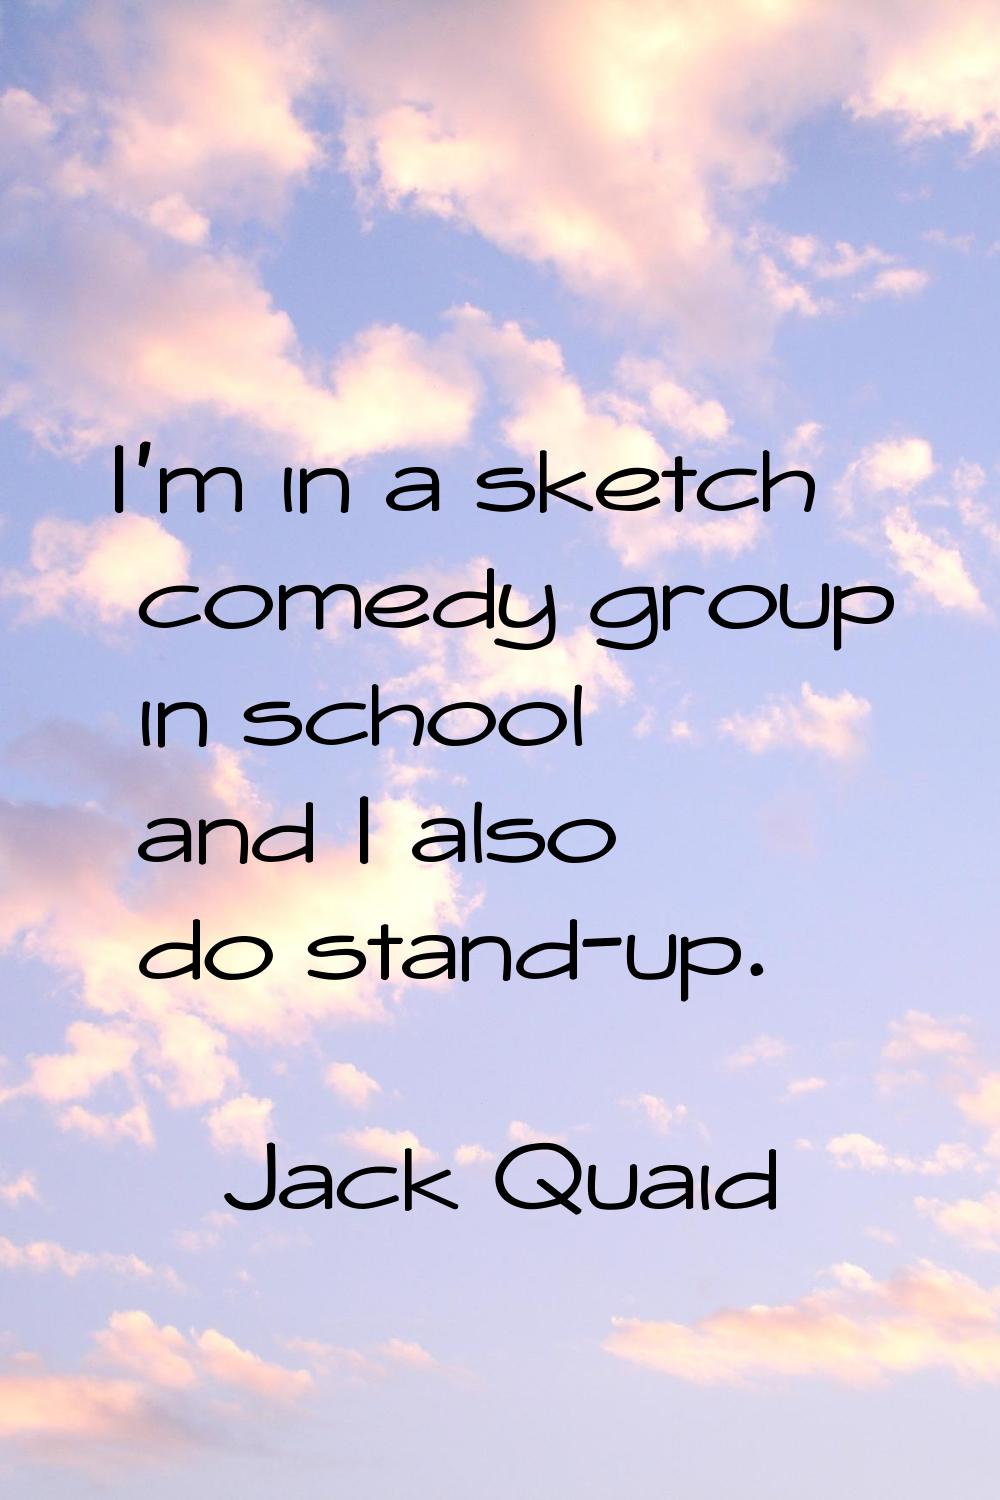 I'm in a sketch comedy group in school and I also do stand-up.